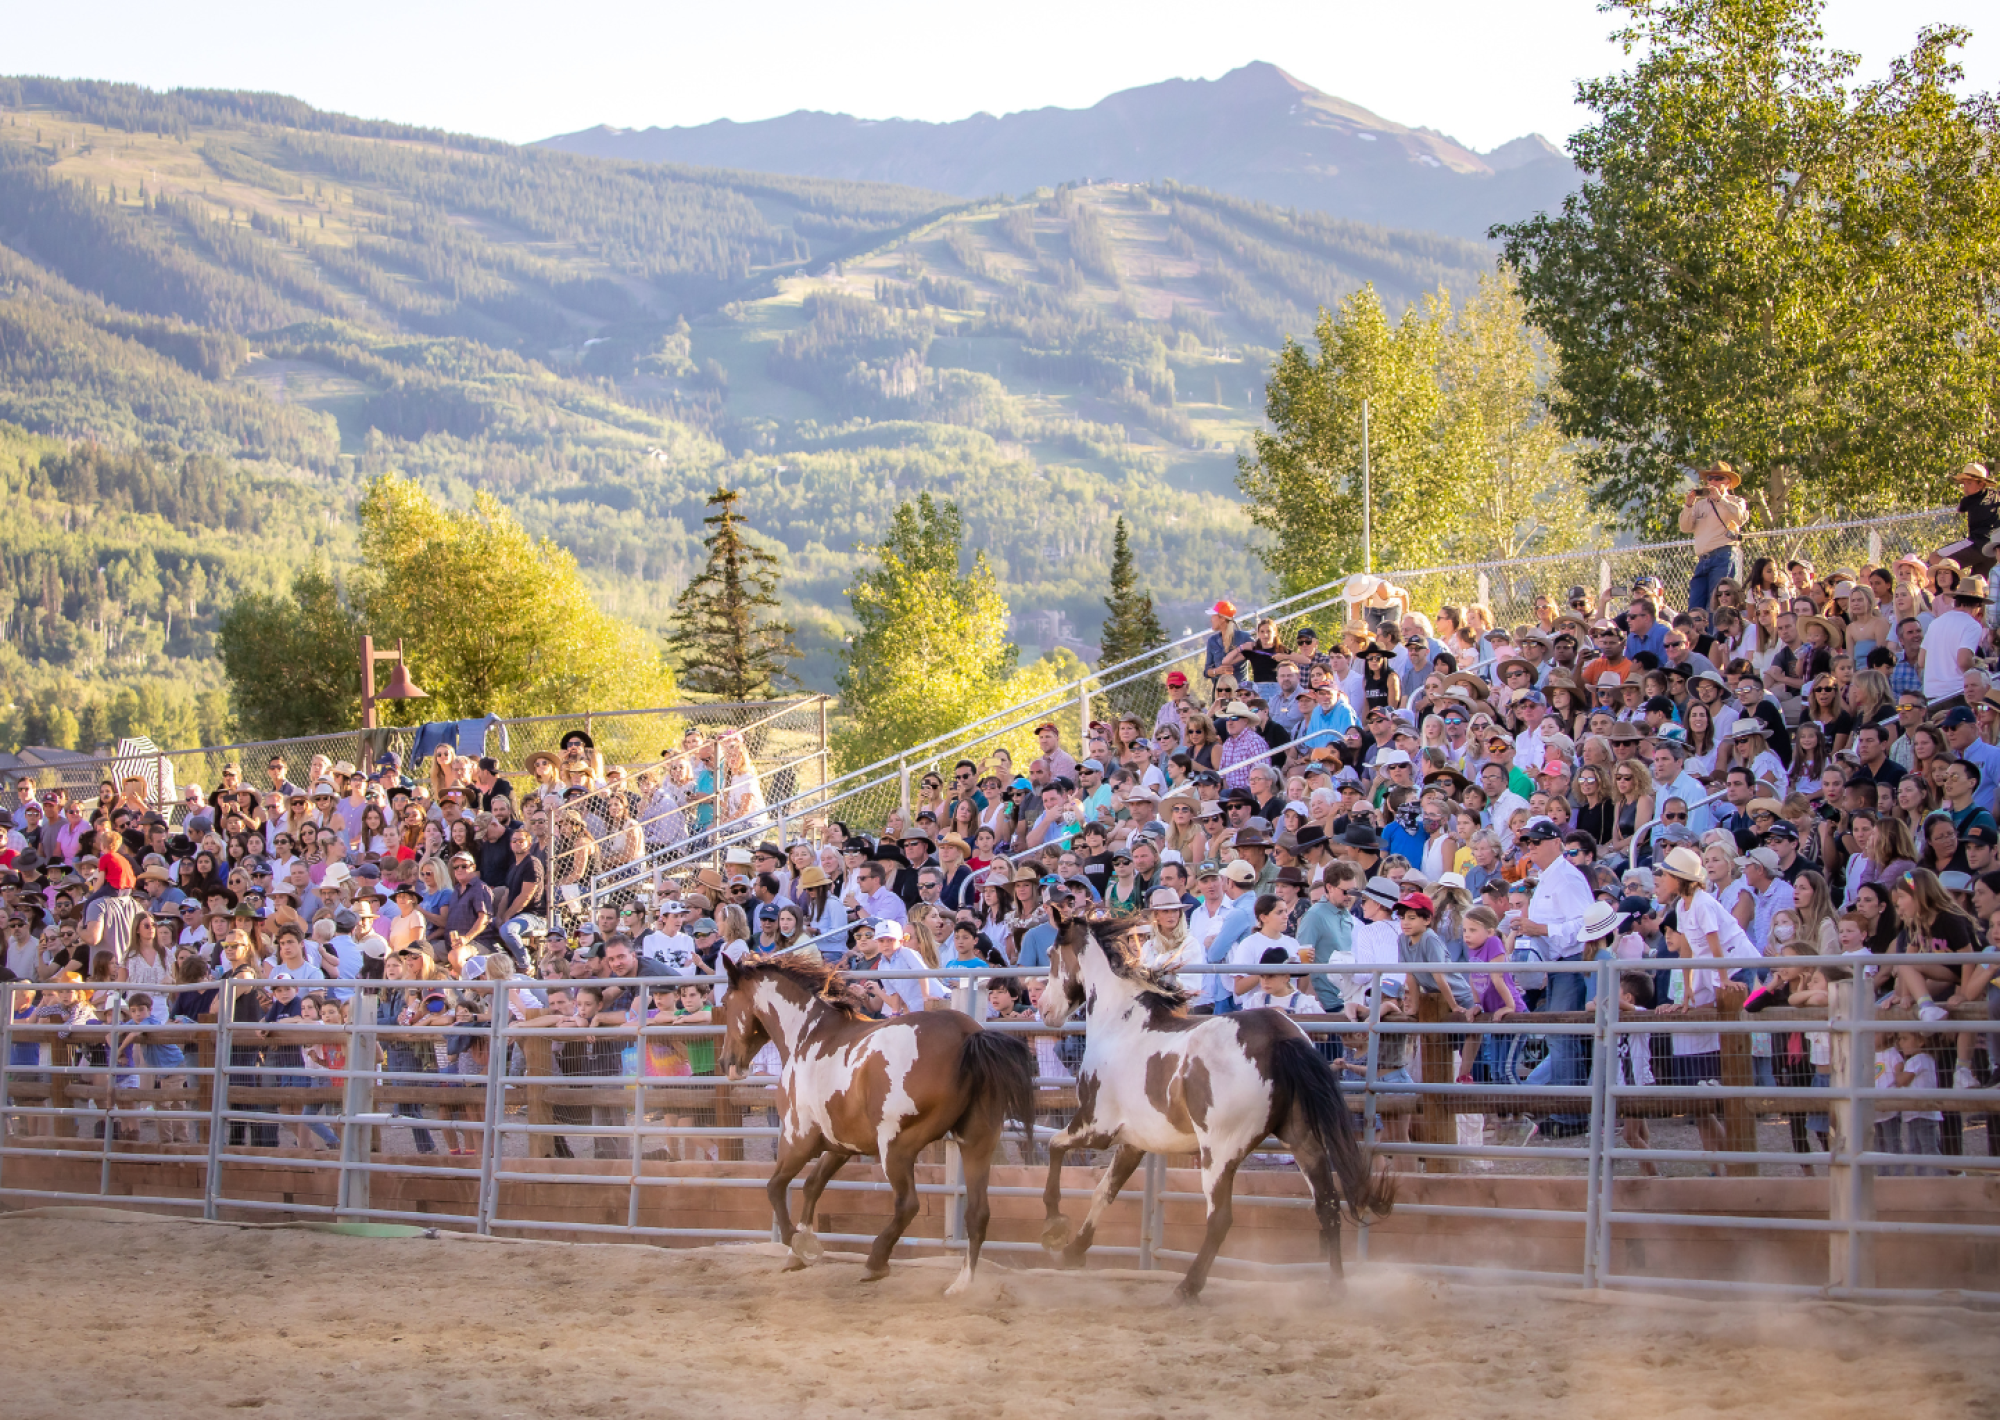 A large crowd watches horses gallop in a fenced area, with a mountainous landscape in the background.